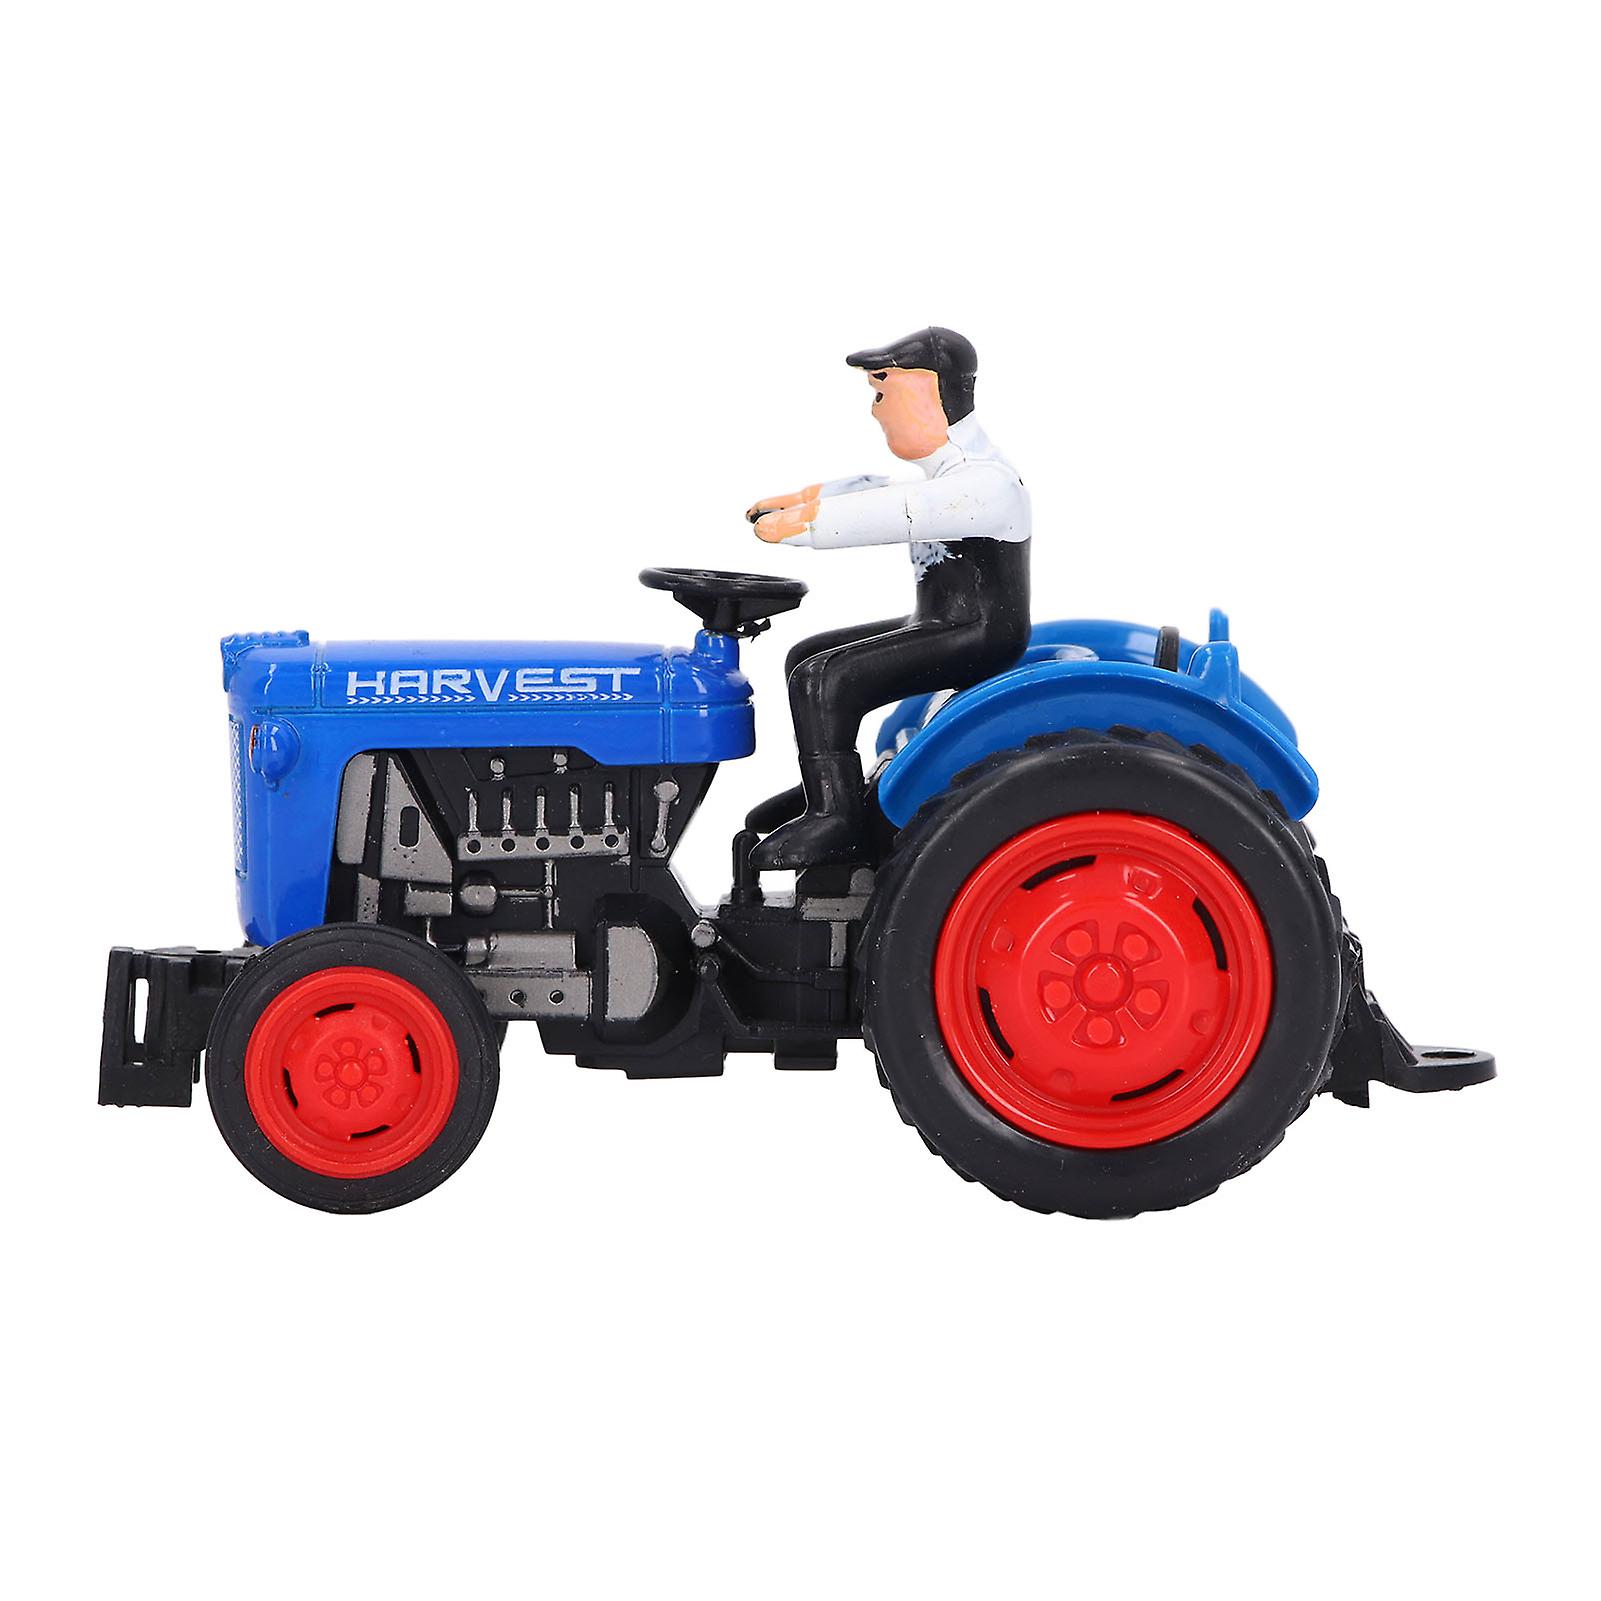 Simulation Tractor Vehicle Model Sturdy Alloy Engineering Farmer Car Toy For Childrenblue